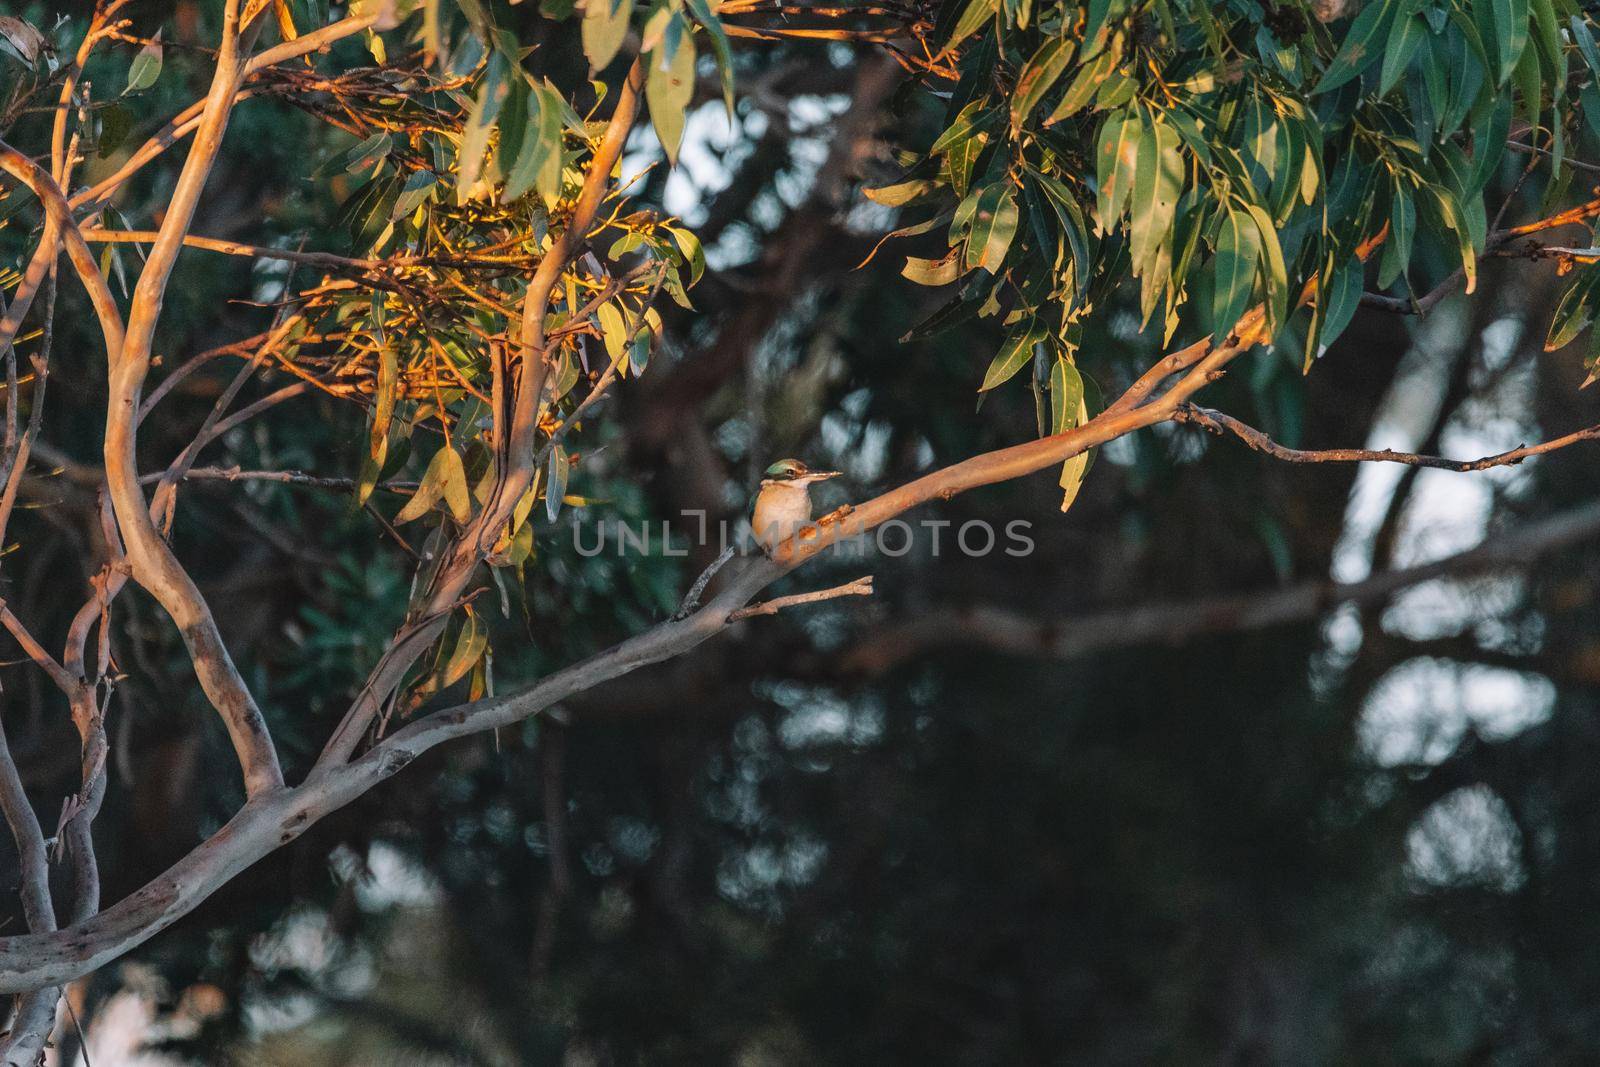 Sacred Kingfisher Perched in a Tree NSW by braydenstanfordphoto